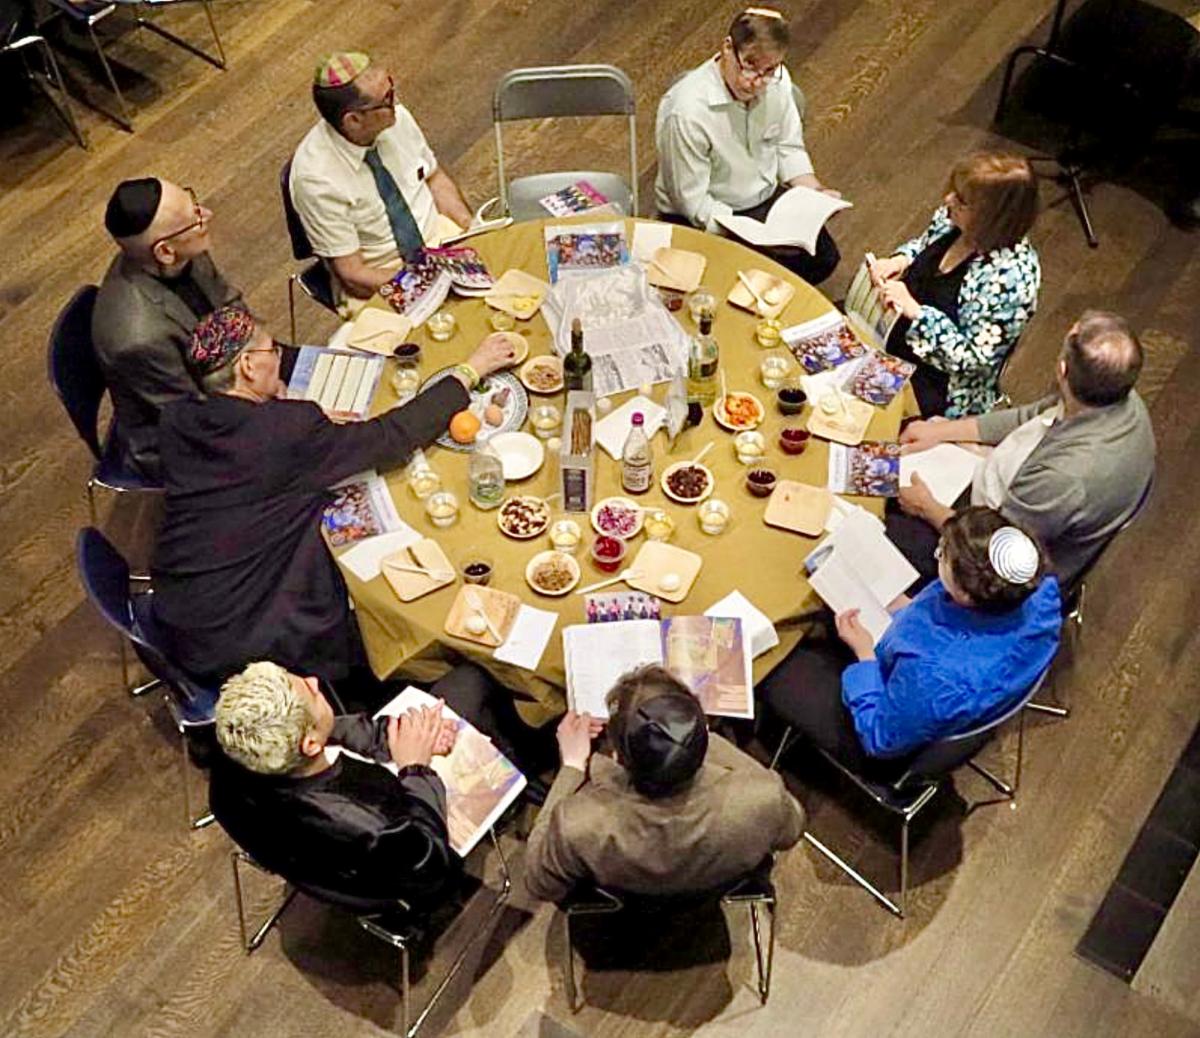 A Seder table in the CBST sanctuary shown from above. Participants sit around the table, which is full of glasses, plates, books, and everything that makes a Seder.